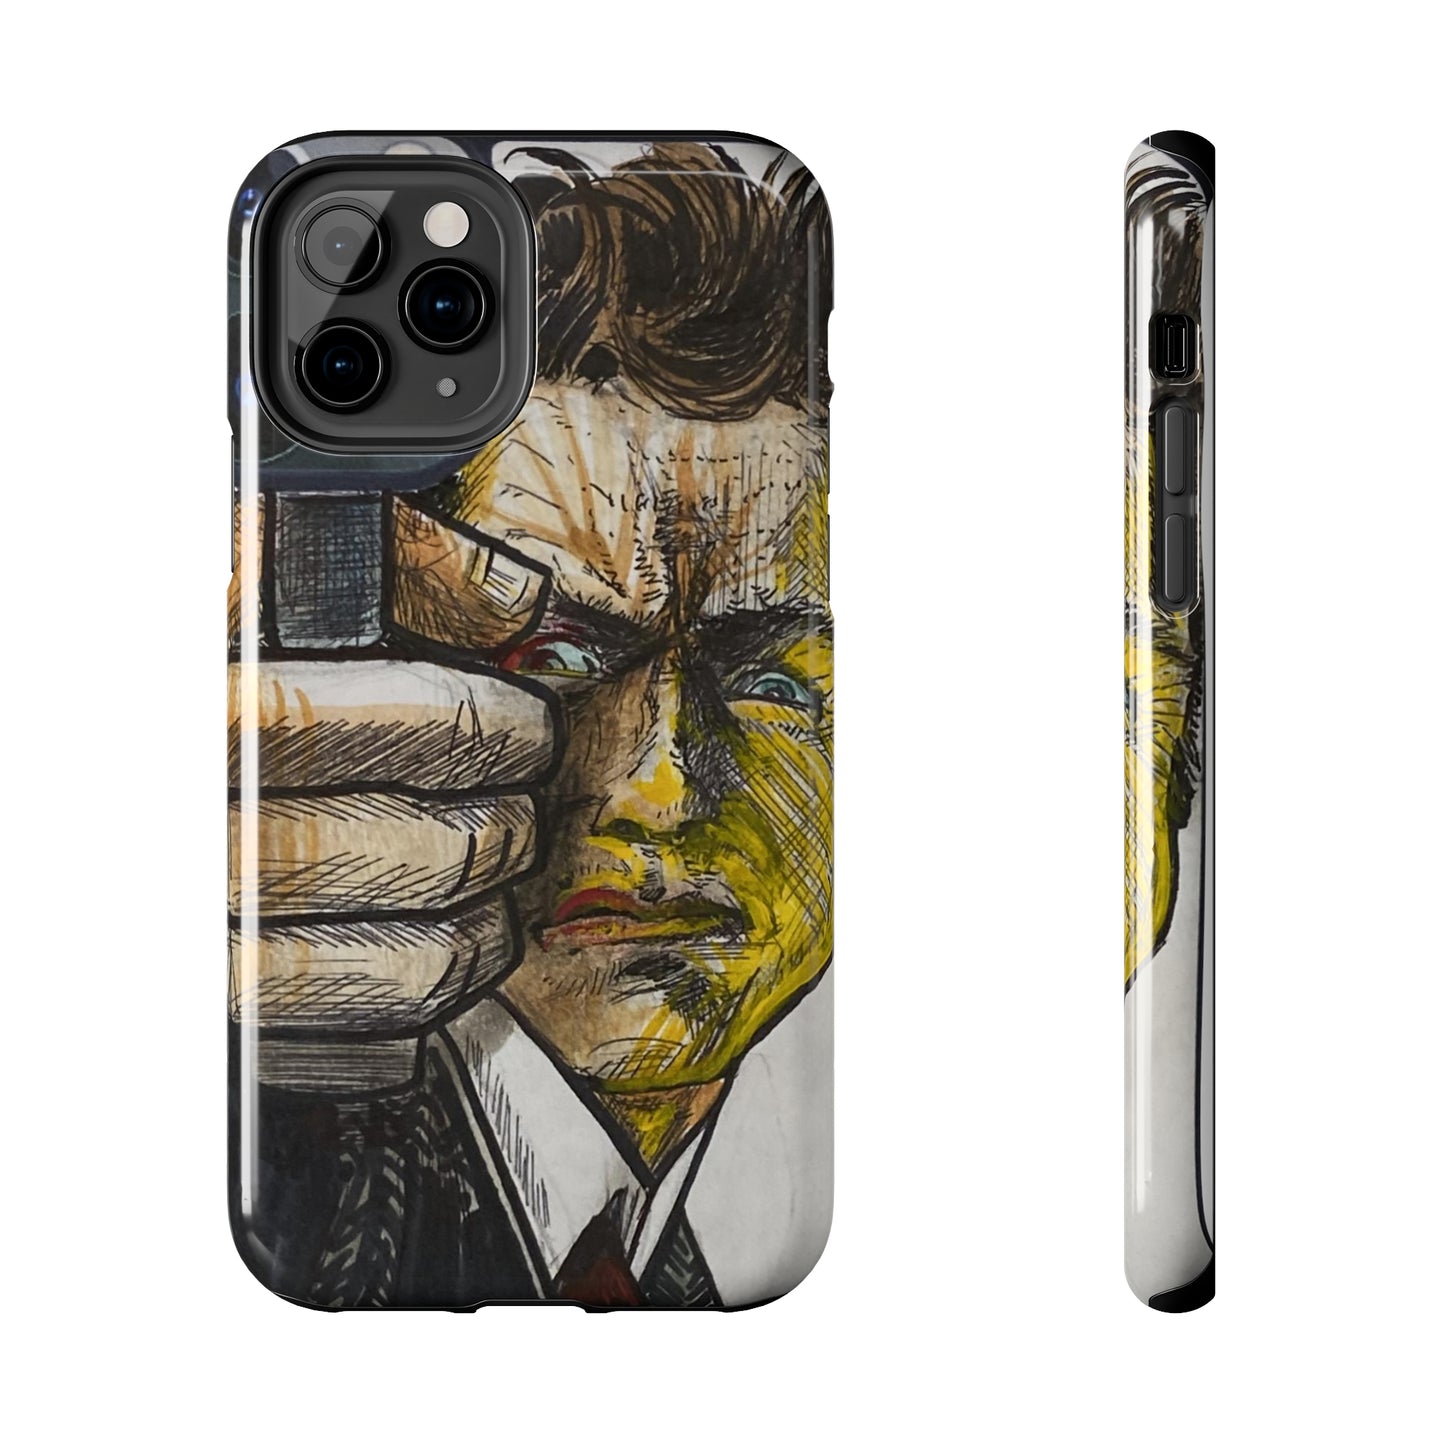 Case Mate Tough Phone Cases Featuring "Dirty Harry" fan art by #ShallyBrady